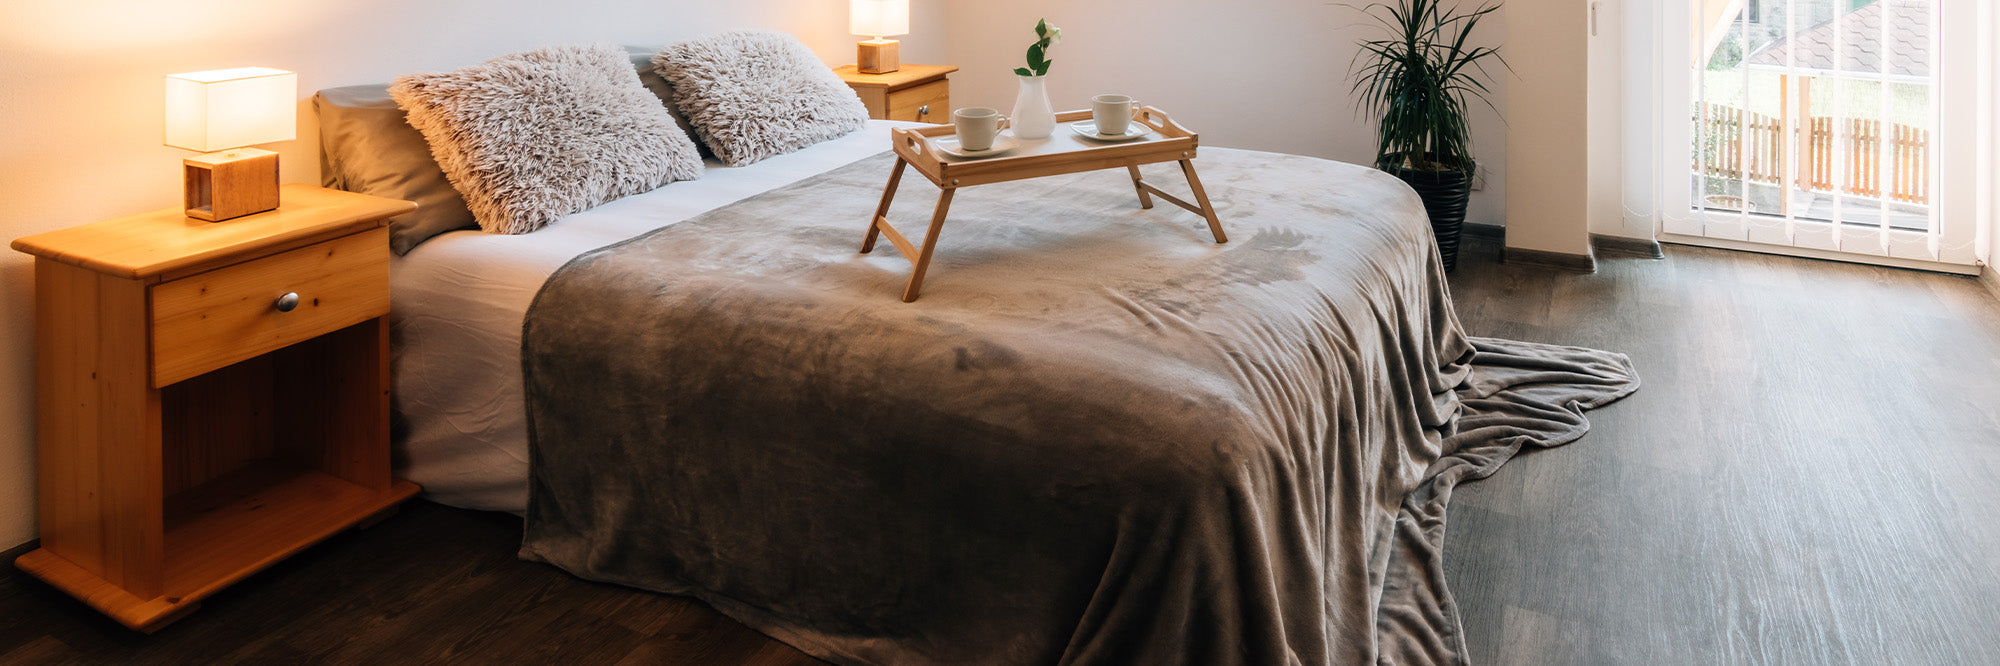 Mattress Dimensions and Blanket Sizes - Featuring a luster loft fleece blanket in a modern bedroom, American Blanket Company